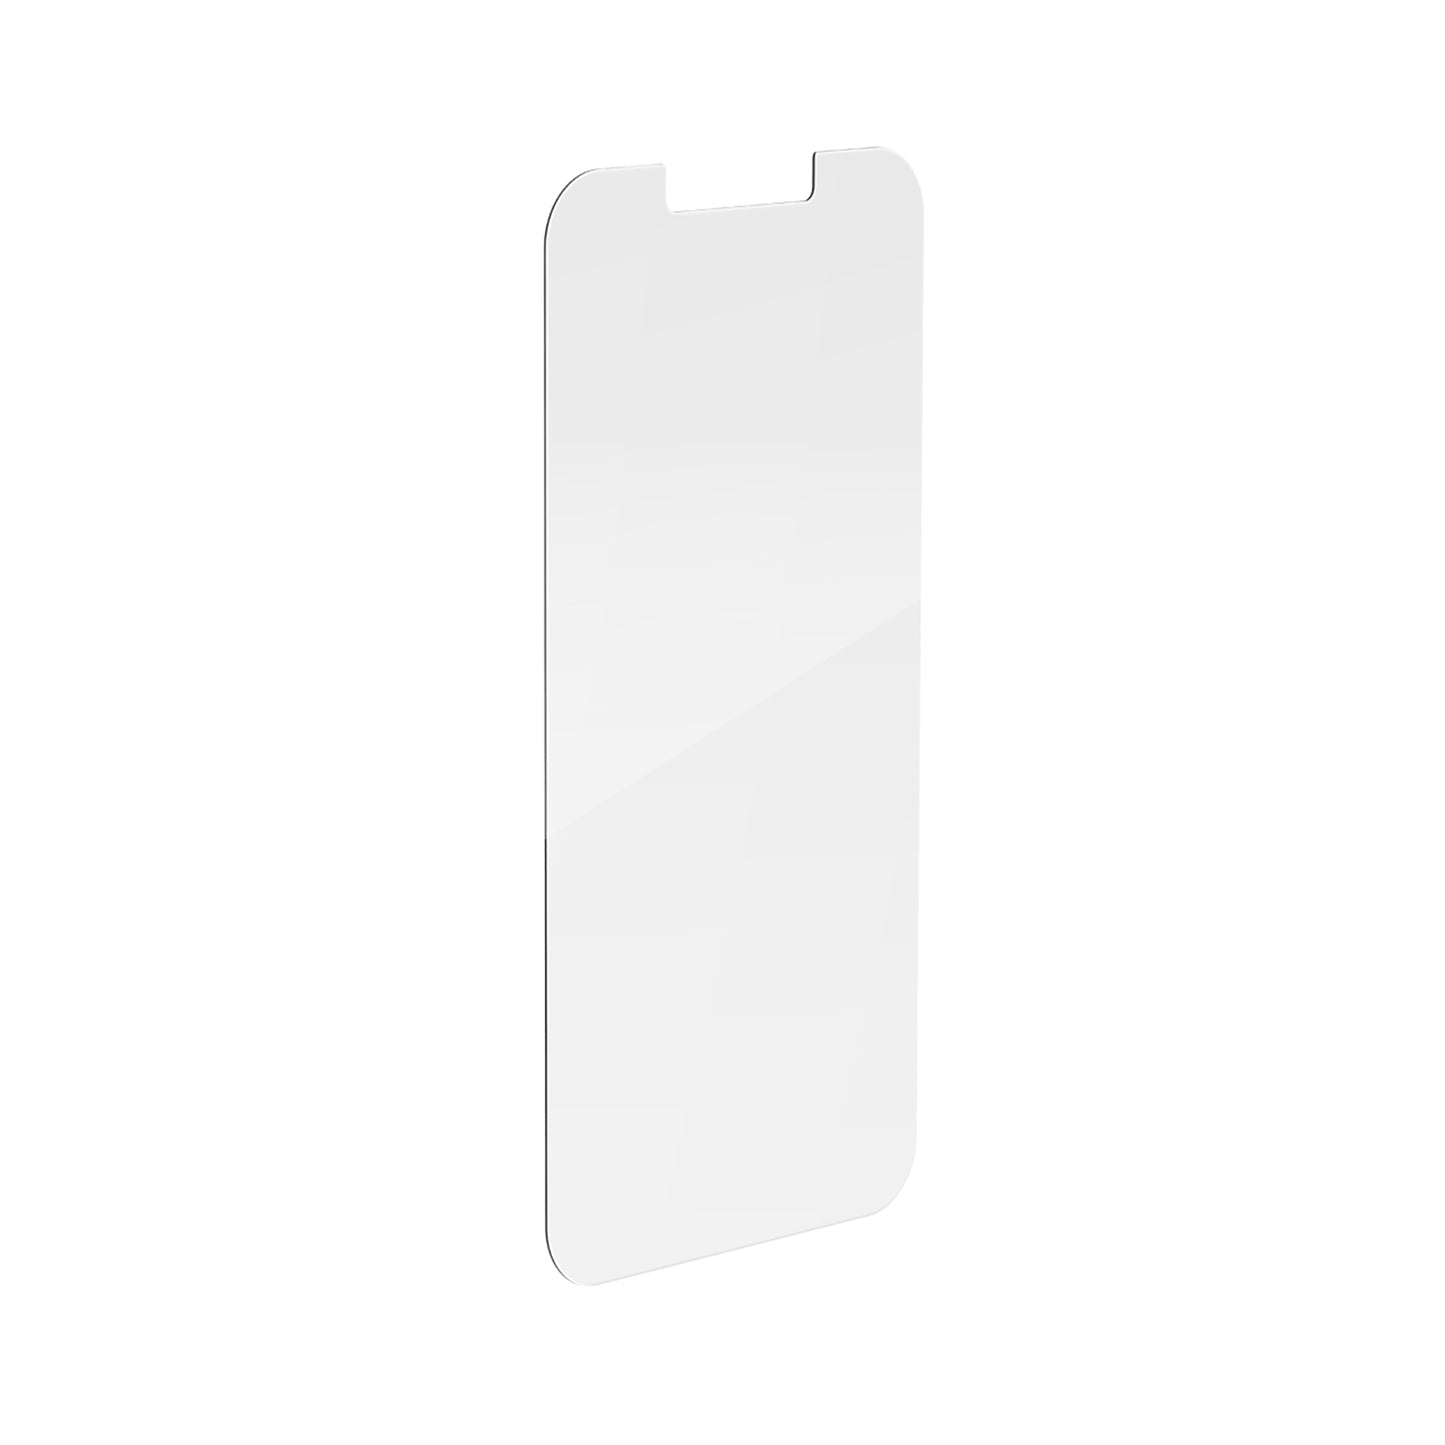 JUST MOBILE Xkin Tempered Glass for iPhone 13 mini - Clear